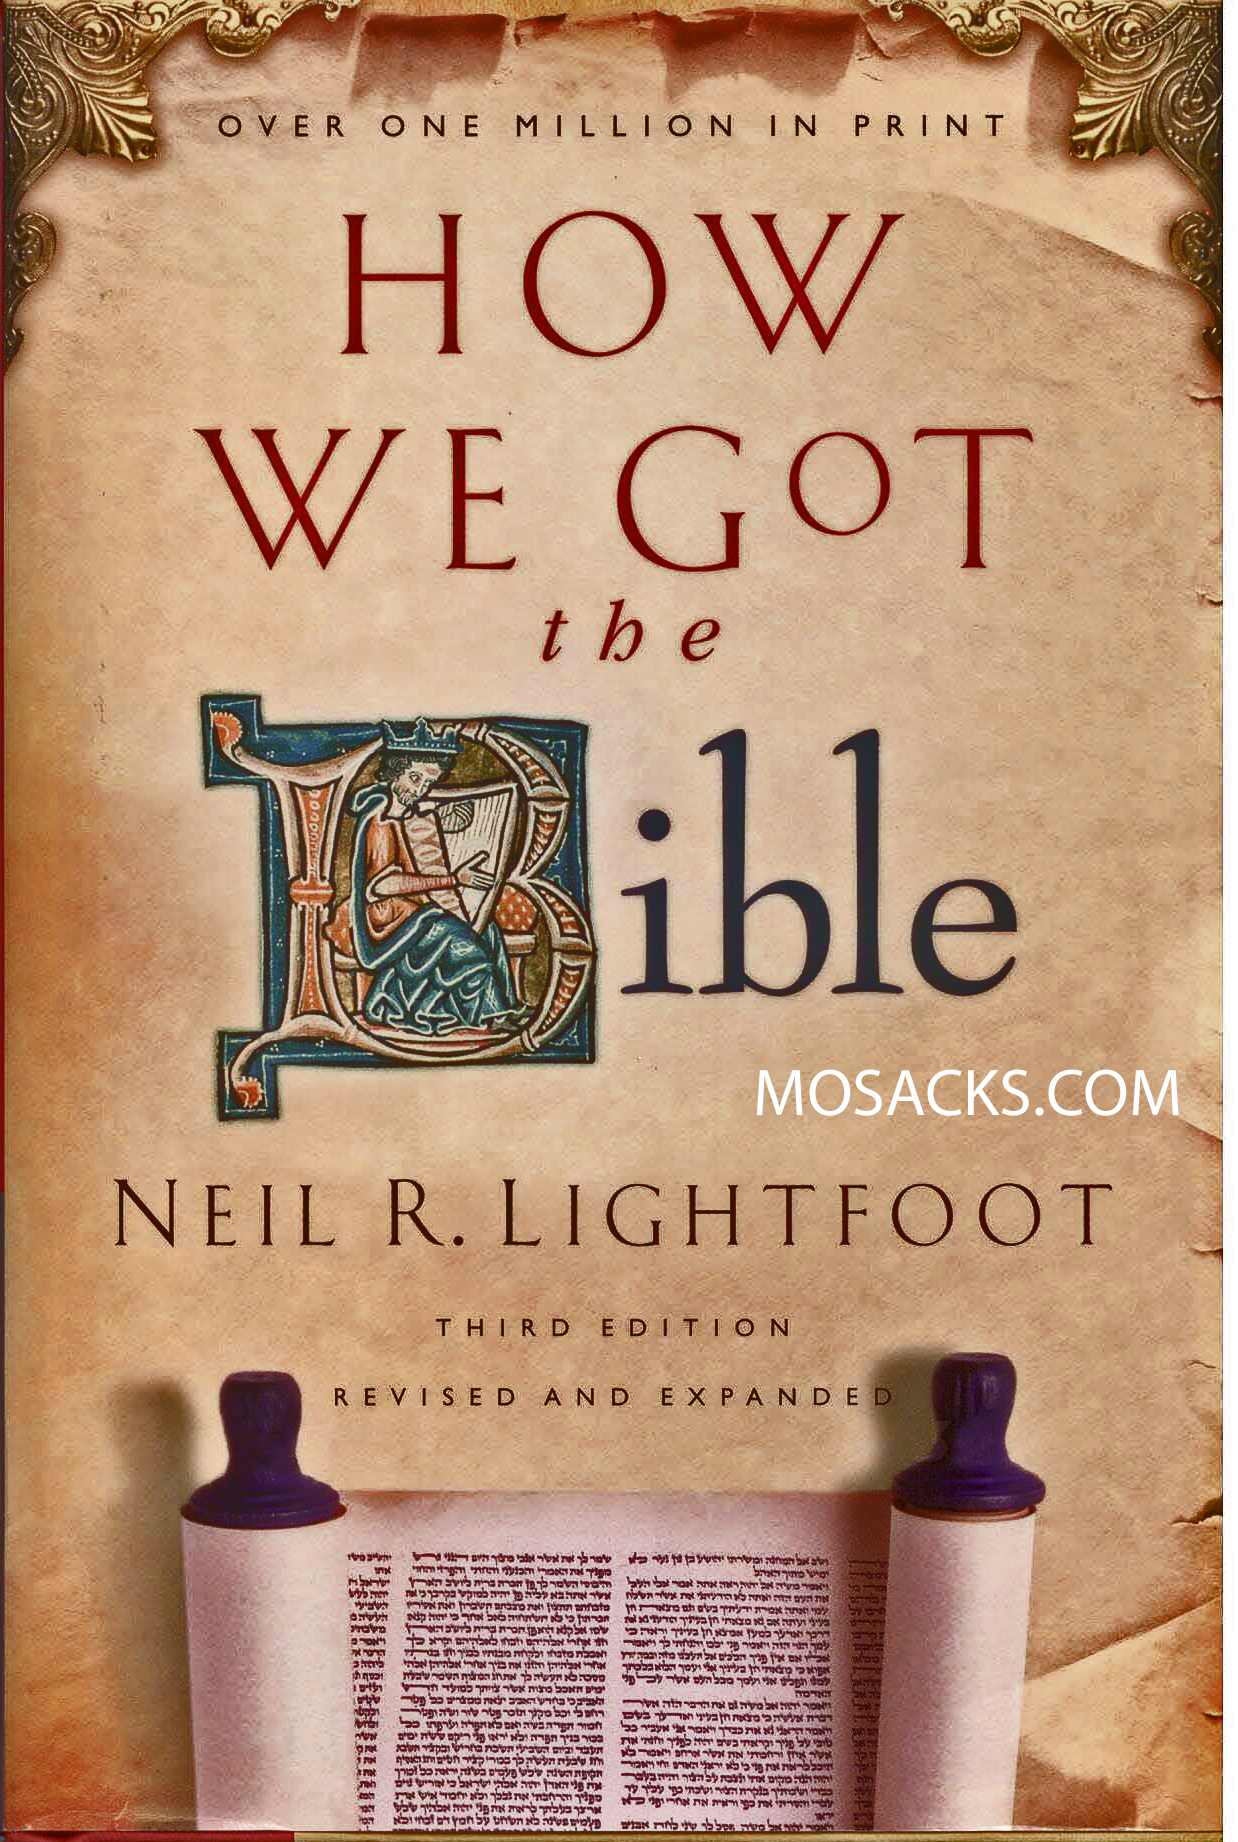 How We Got the Bible by Neil R. Lightfoot